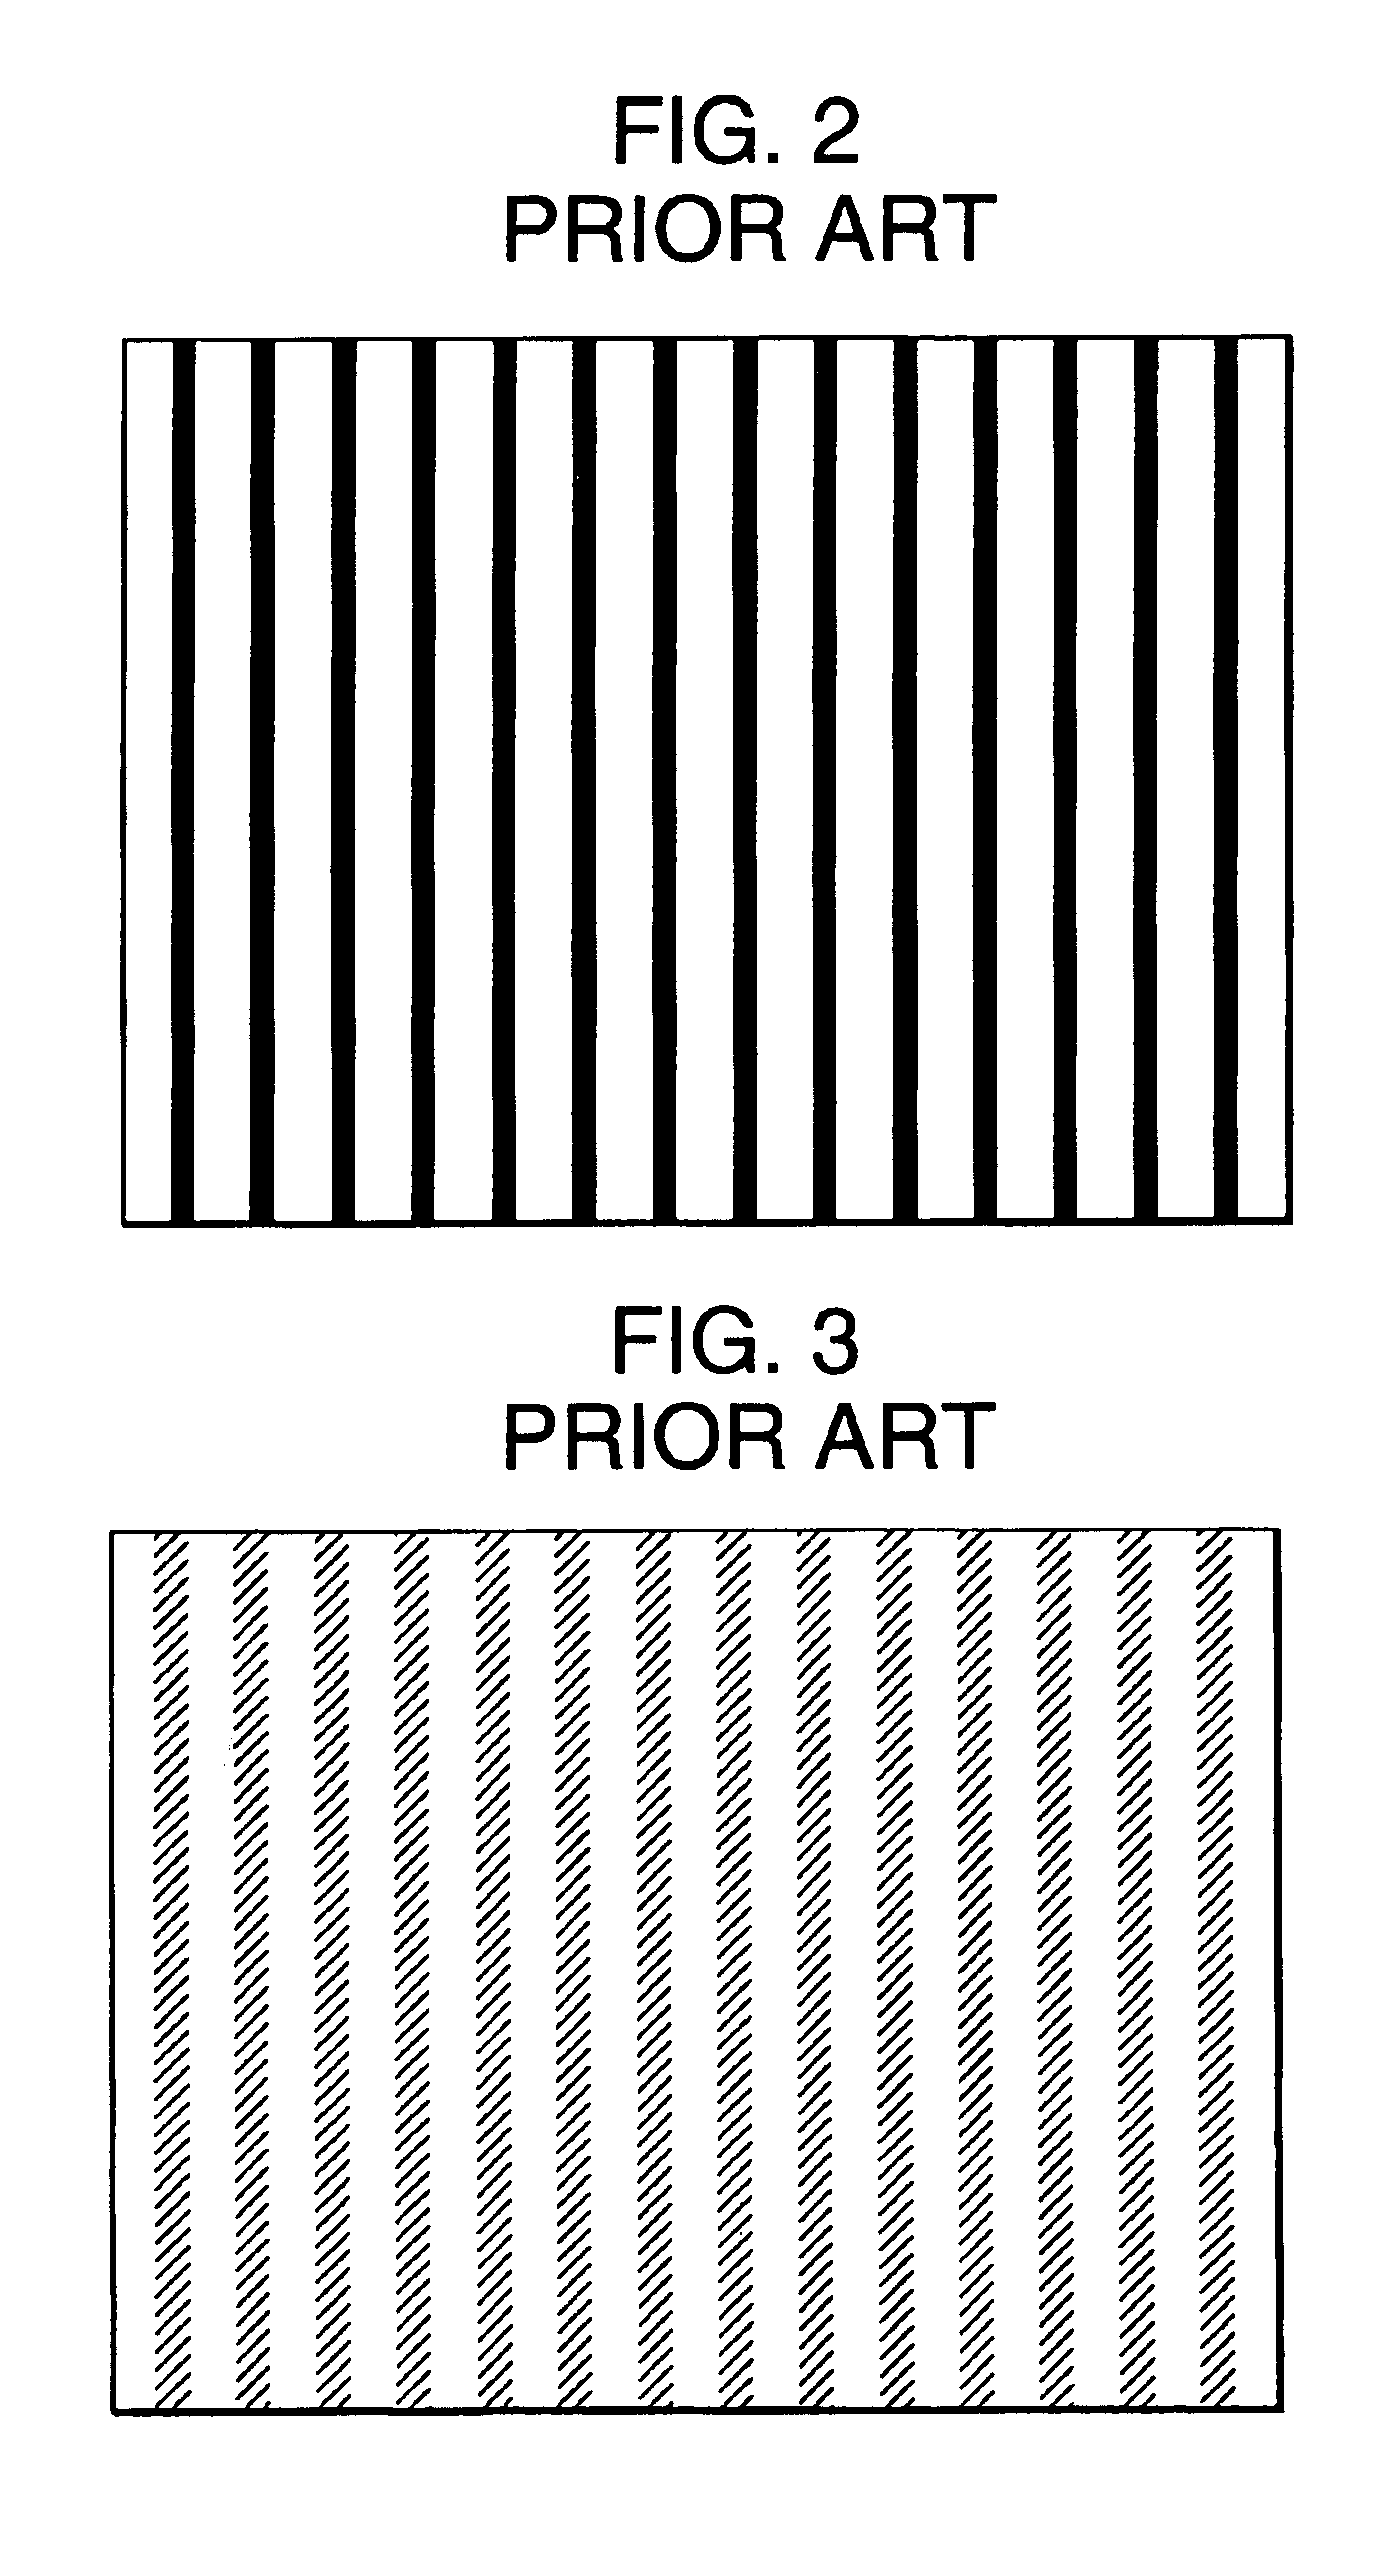 Dot-clock adjustment method and apparatus for a display device, determining correctness of dot-clock frequency from variations in an image characteristic with respect to dot-clock phase